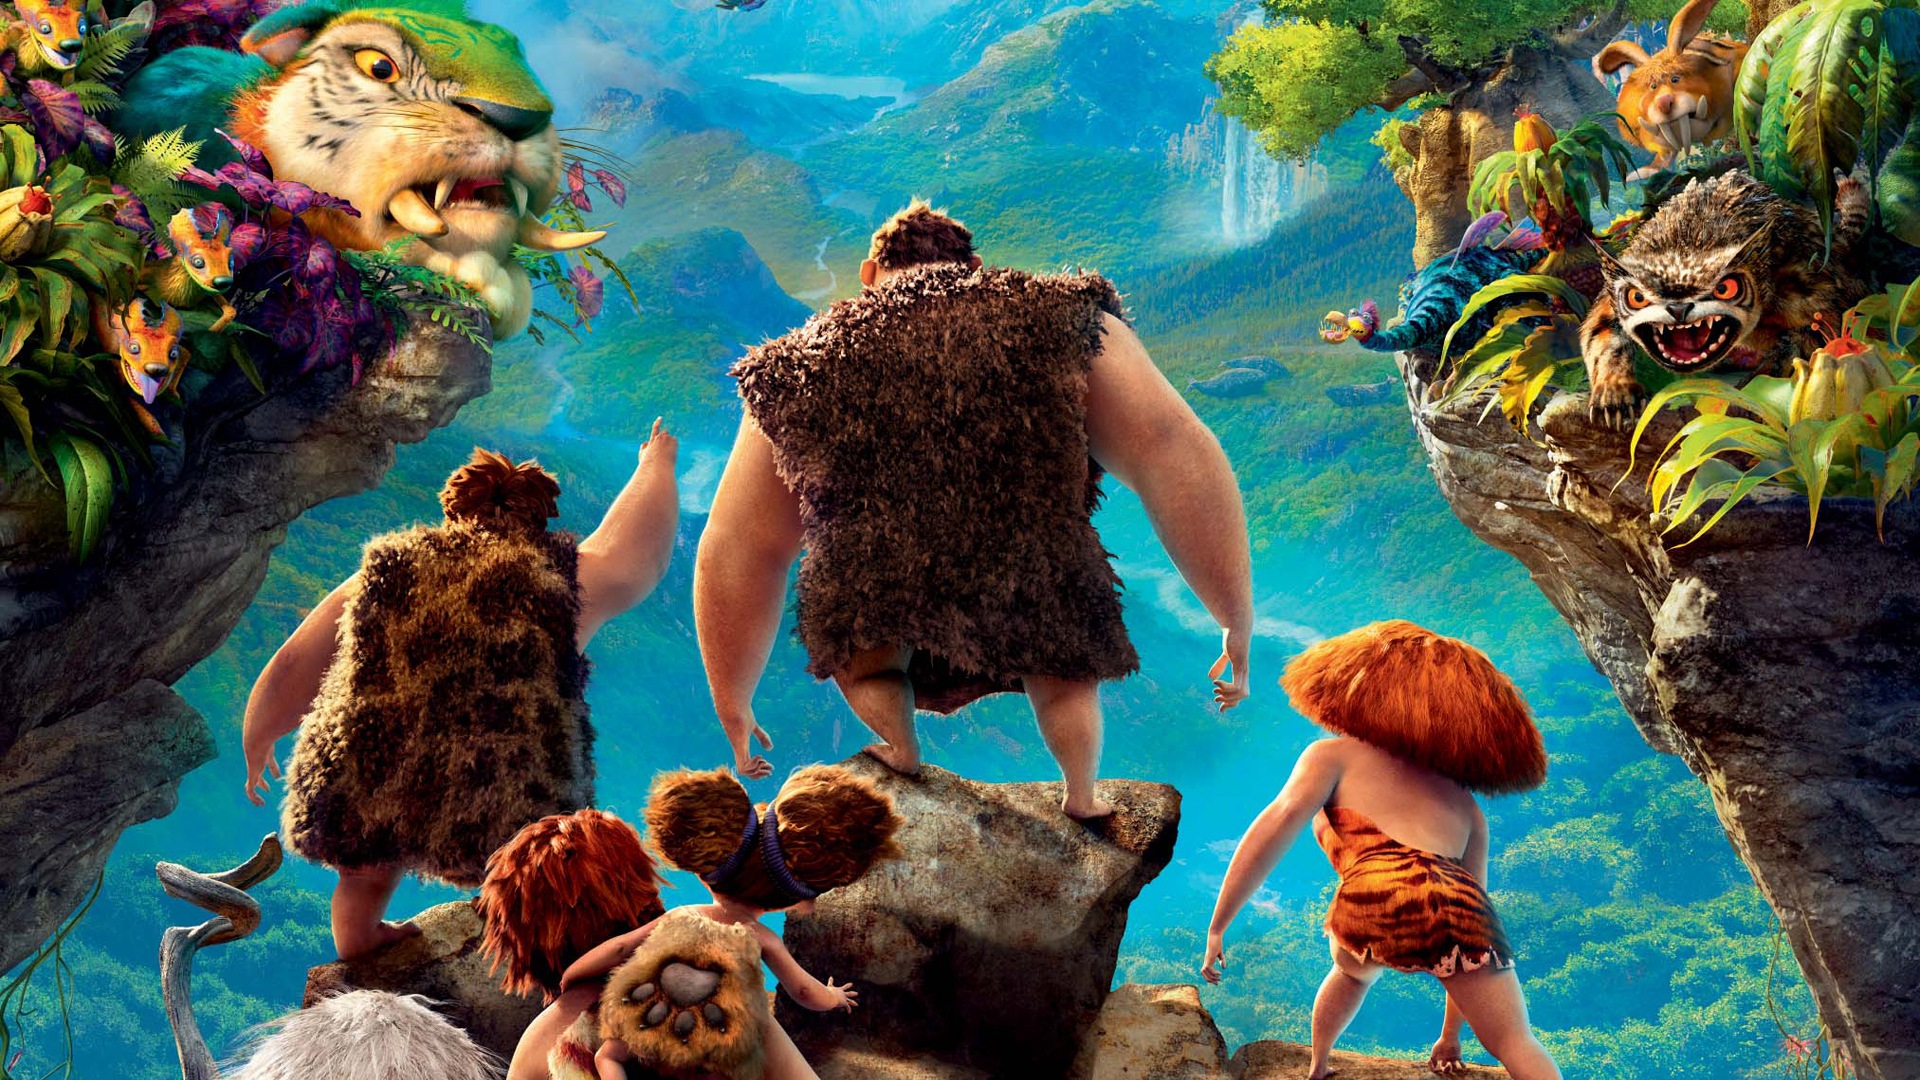 The Croods HD movie wallpapers #5 - 1920x1080